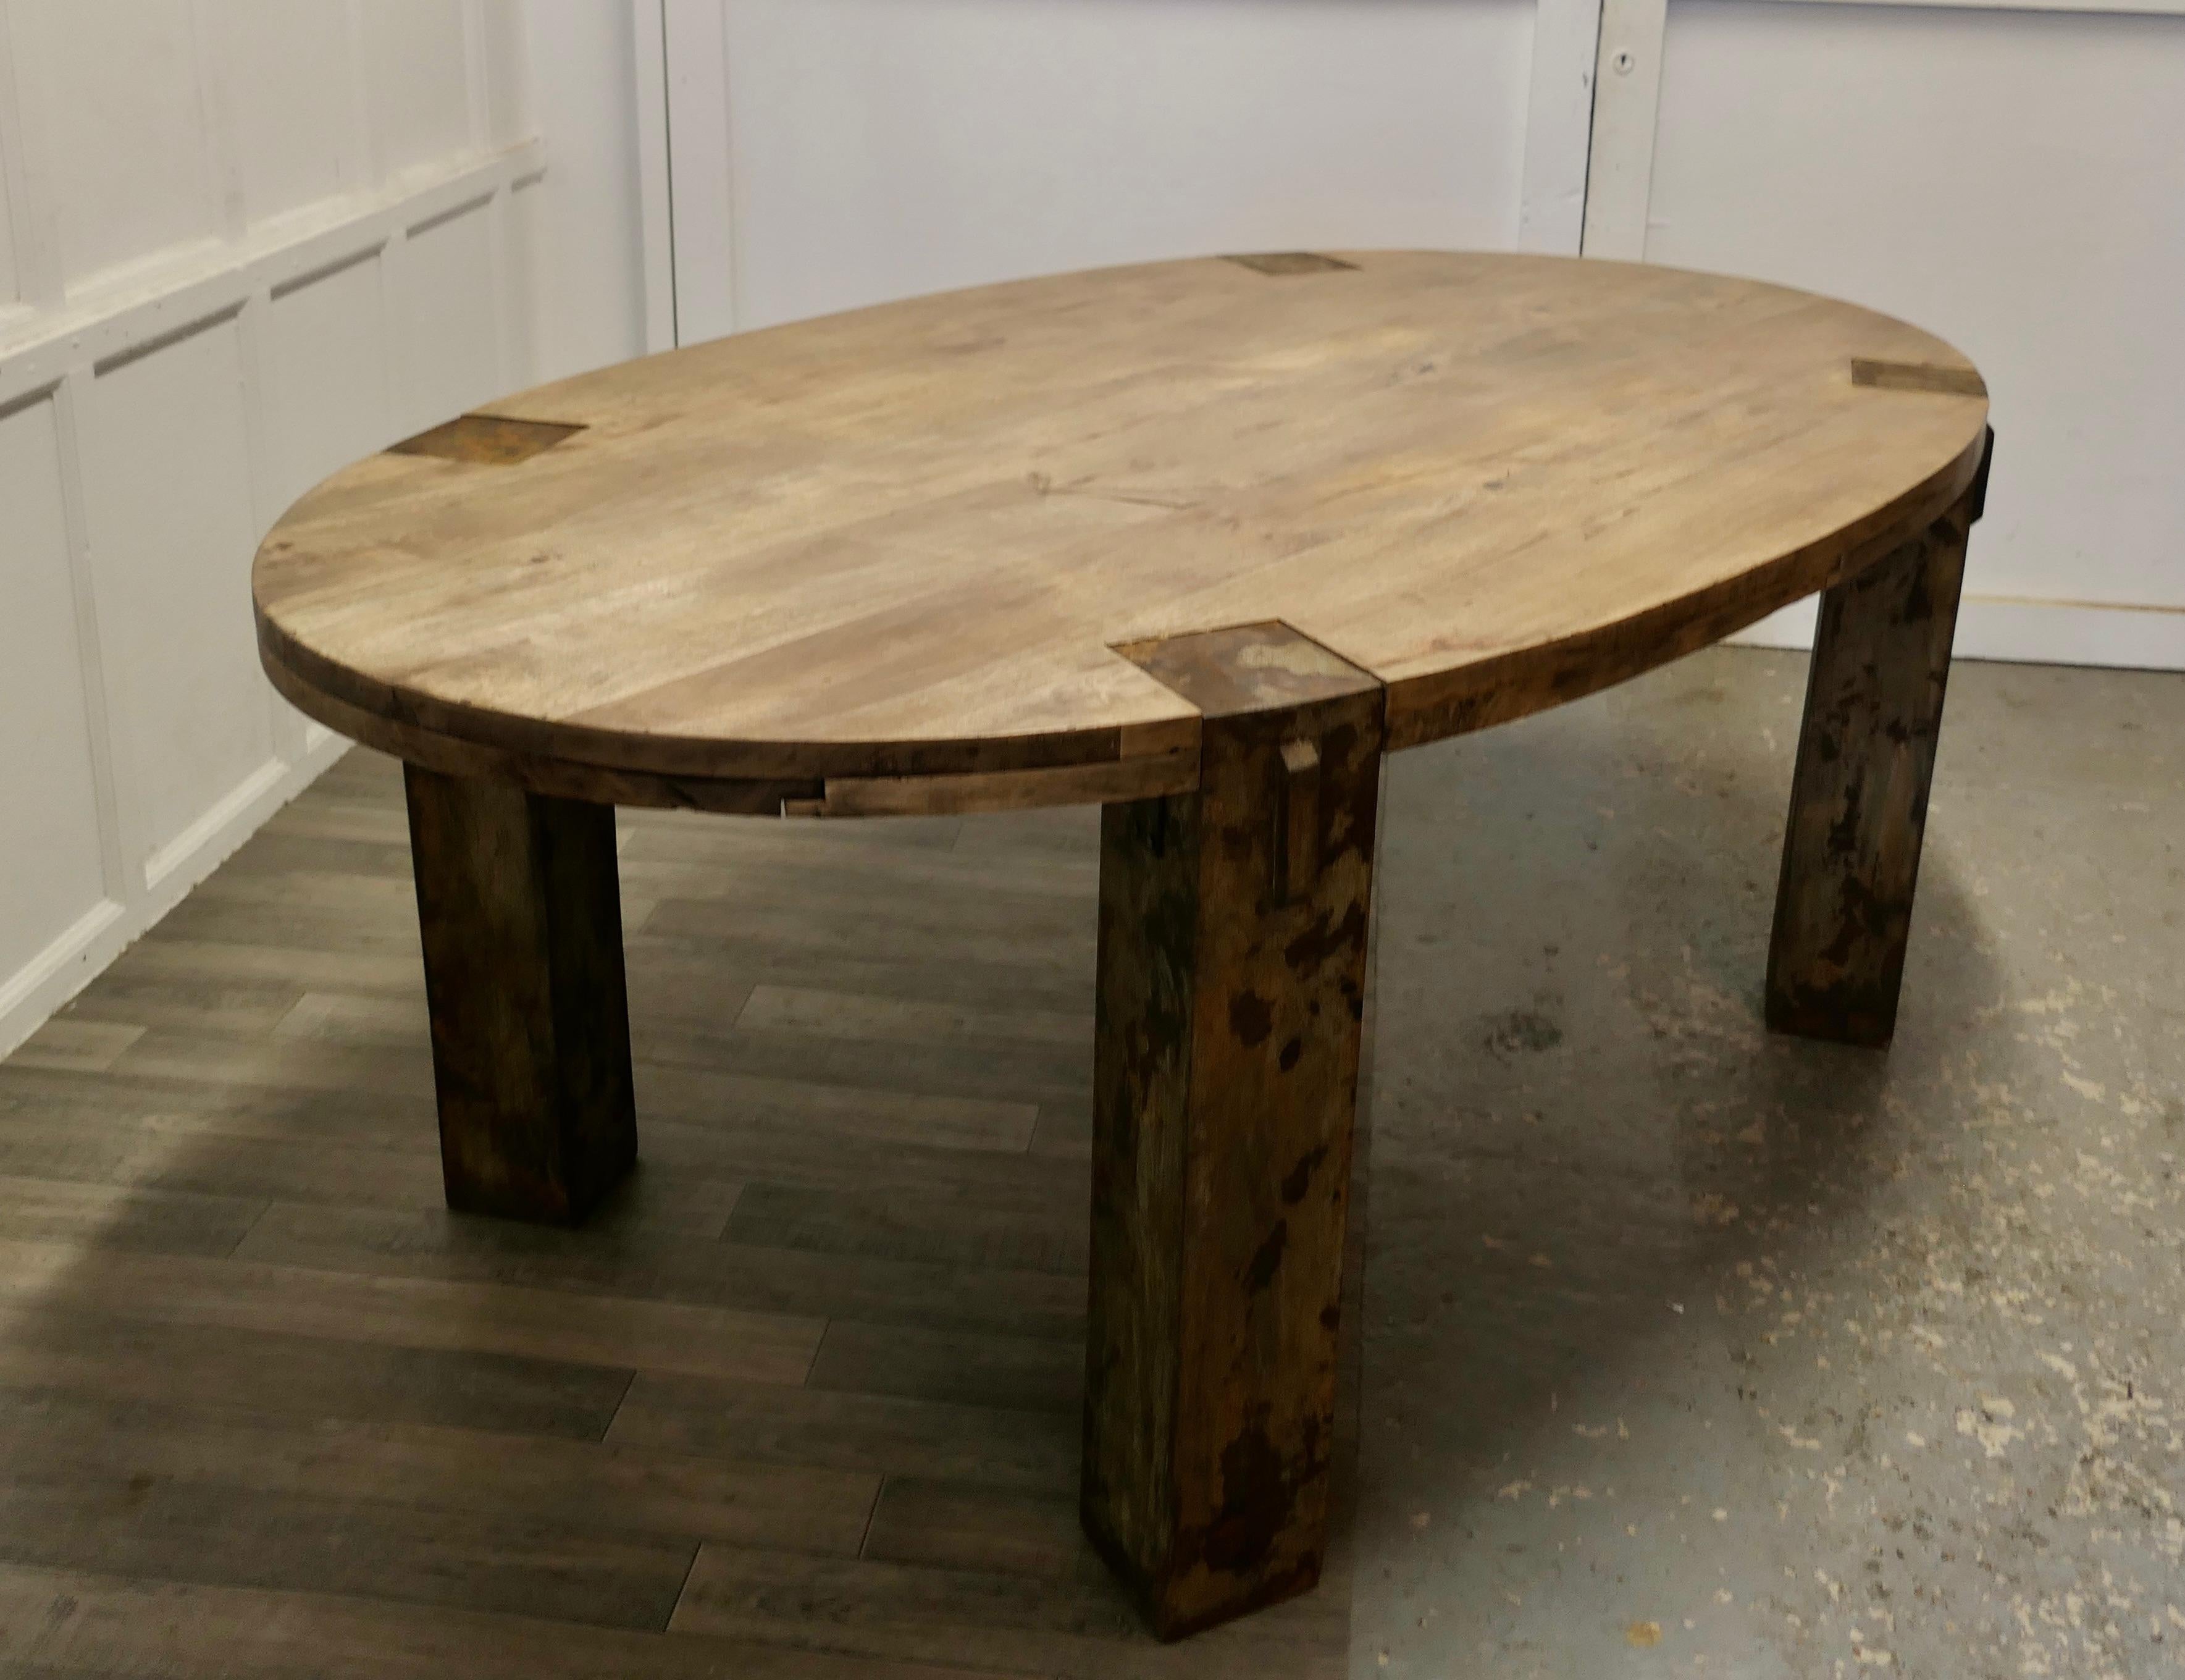 Large chunky oval dining conference table, industrial design
This is a superb piece, the table top is 3” thick and made from heavy planks of solid walnut, the wood has a slightly rustic appearance, the legs are 6” square and have been finished in